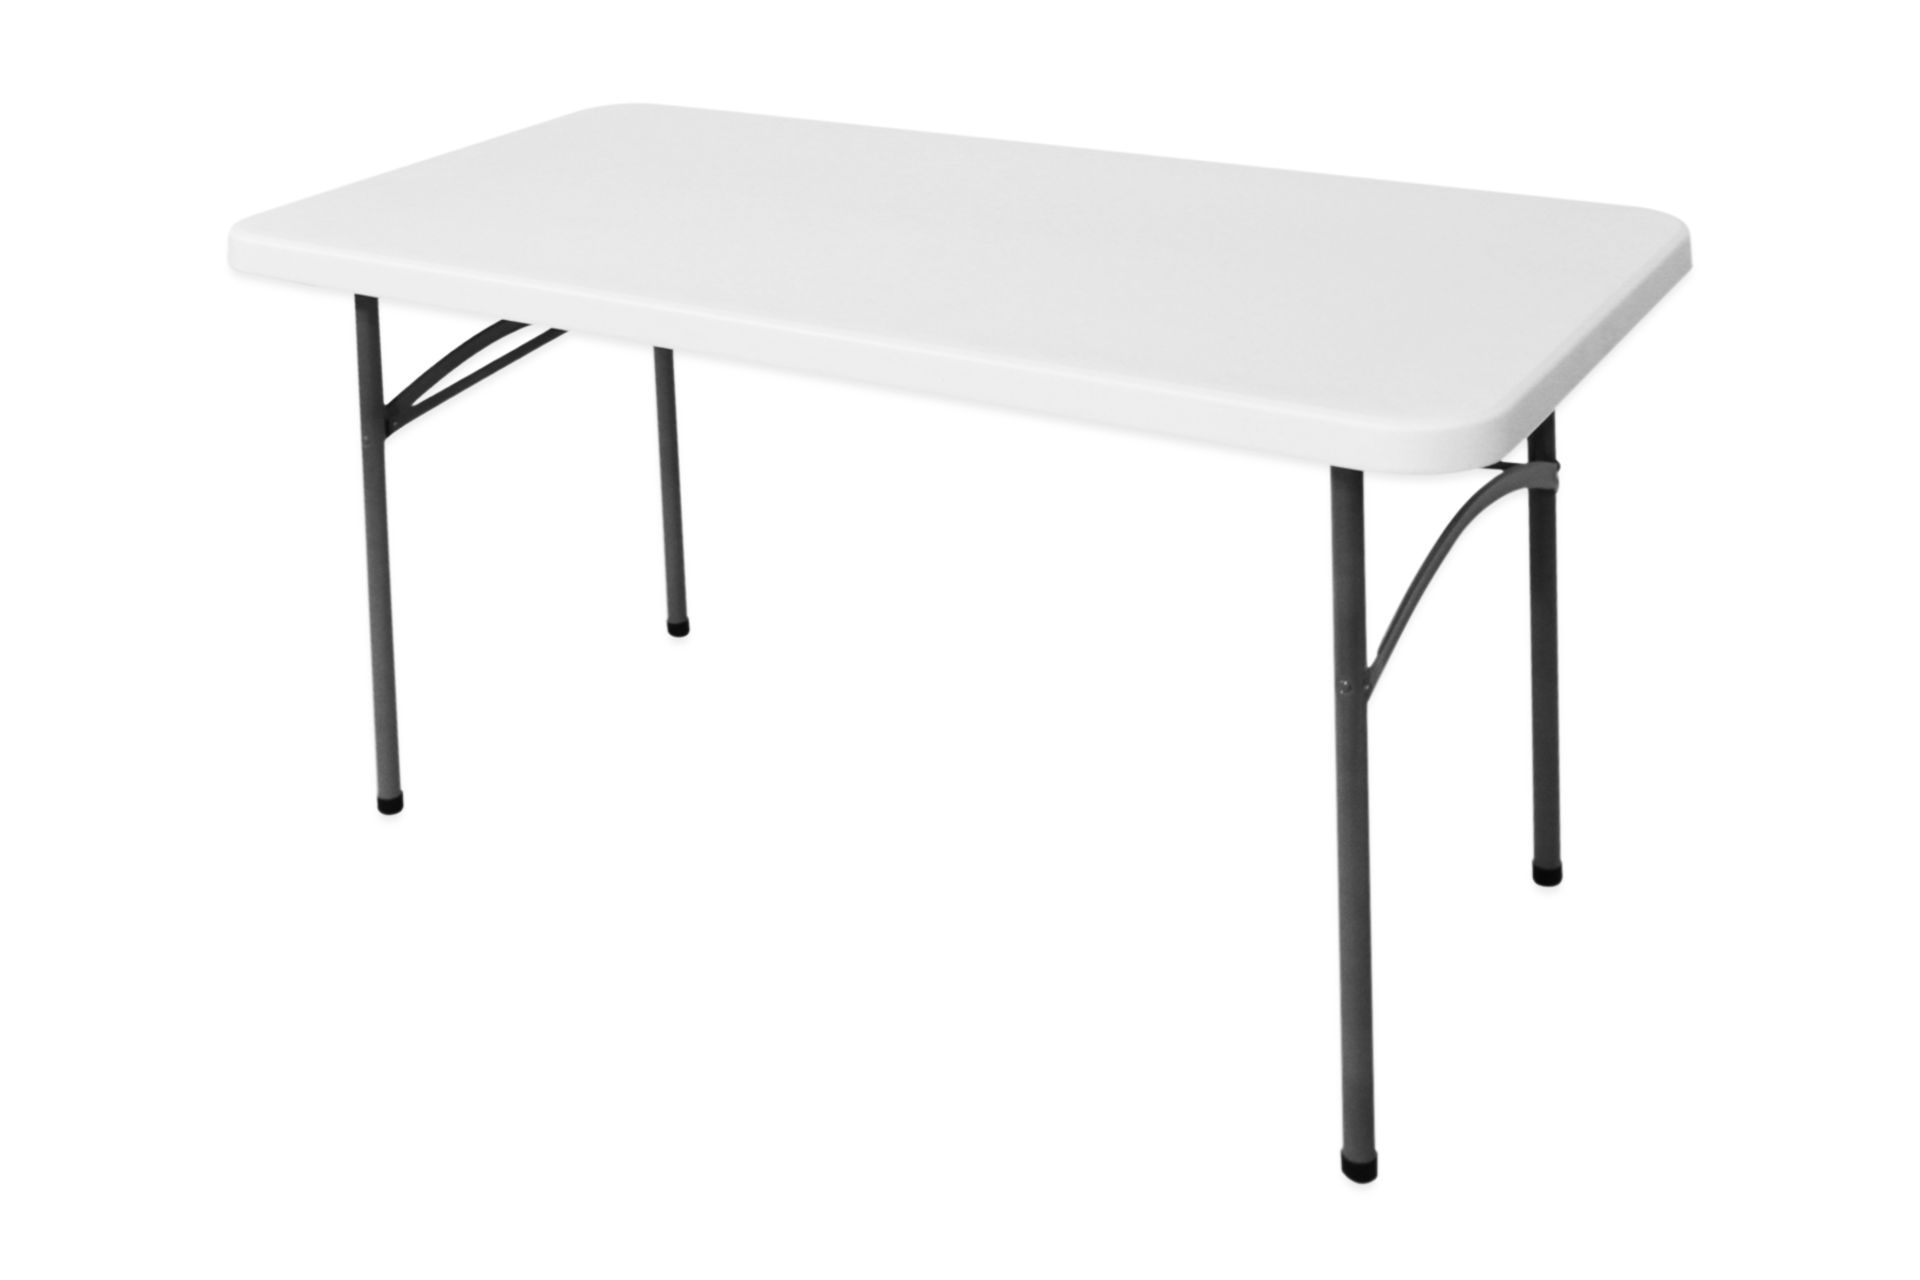 V *TRADE QTY* Grade A 4ft Plastic Trestle Table X 40 YOUR BID PRICE TO BE MULTIPLIED BY FORTY - Image 2 of 4